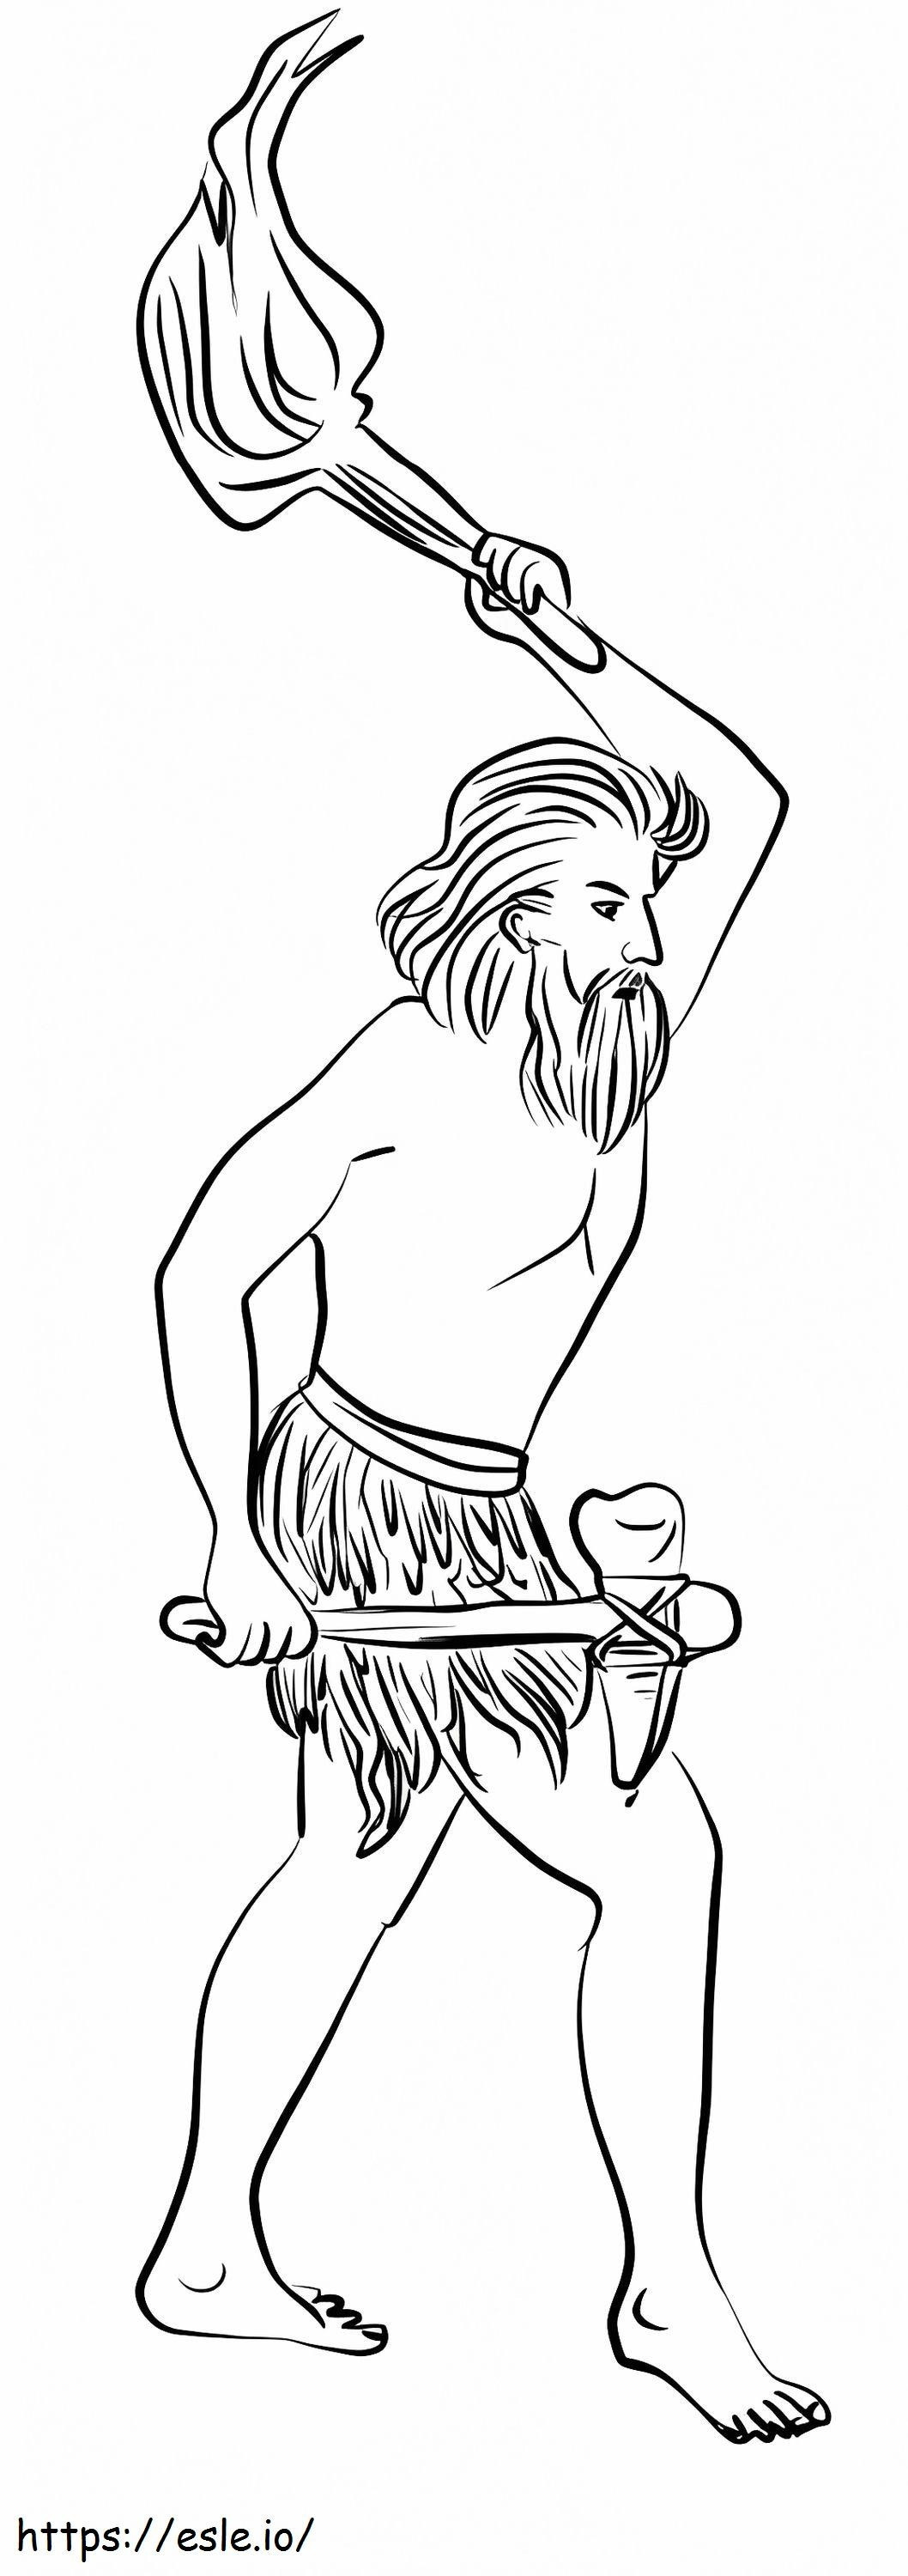 1559874499 Stone Age People A4 coloring page